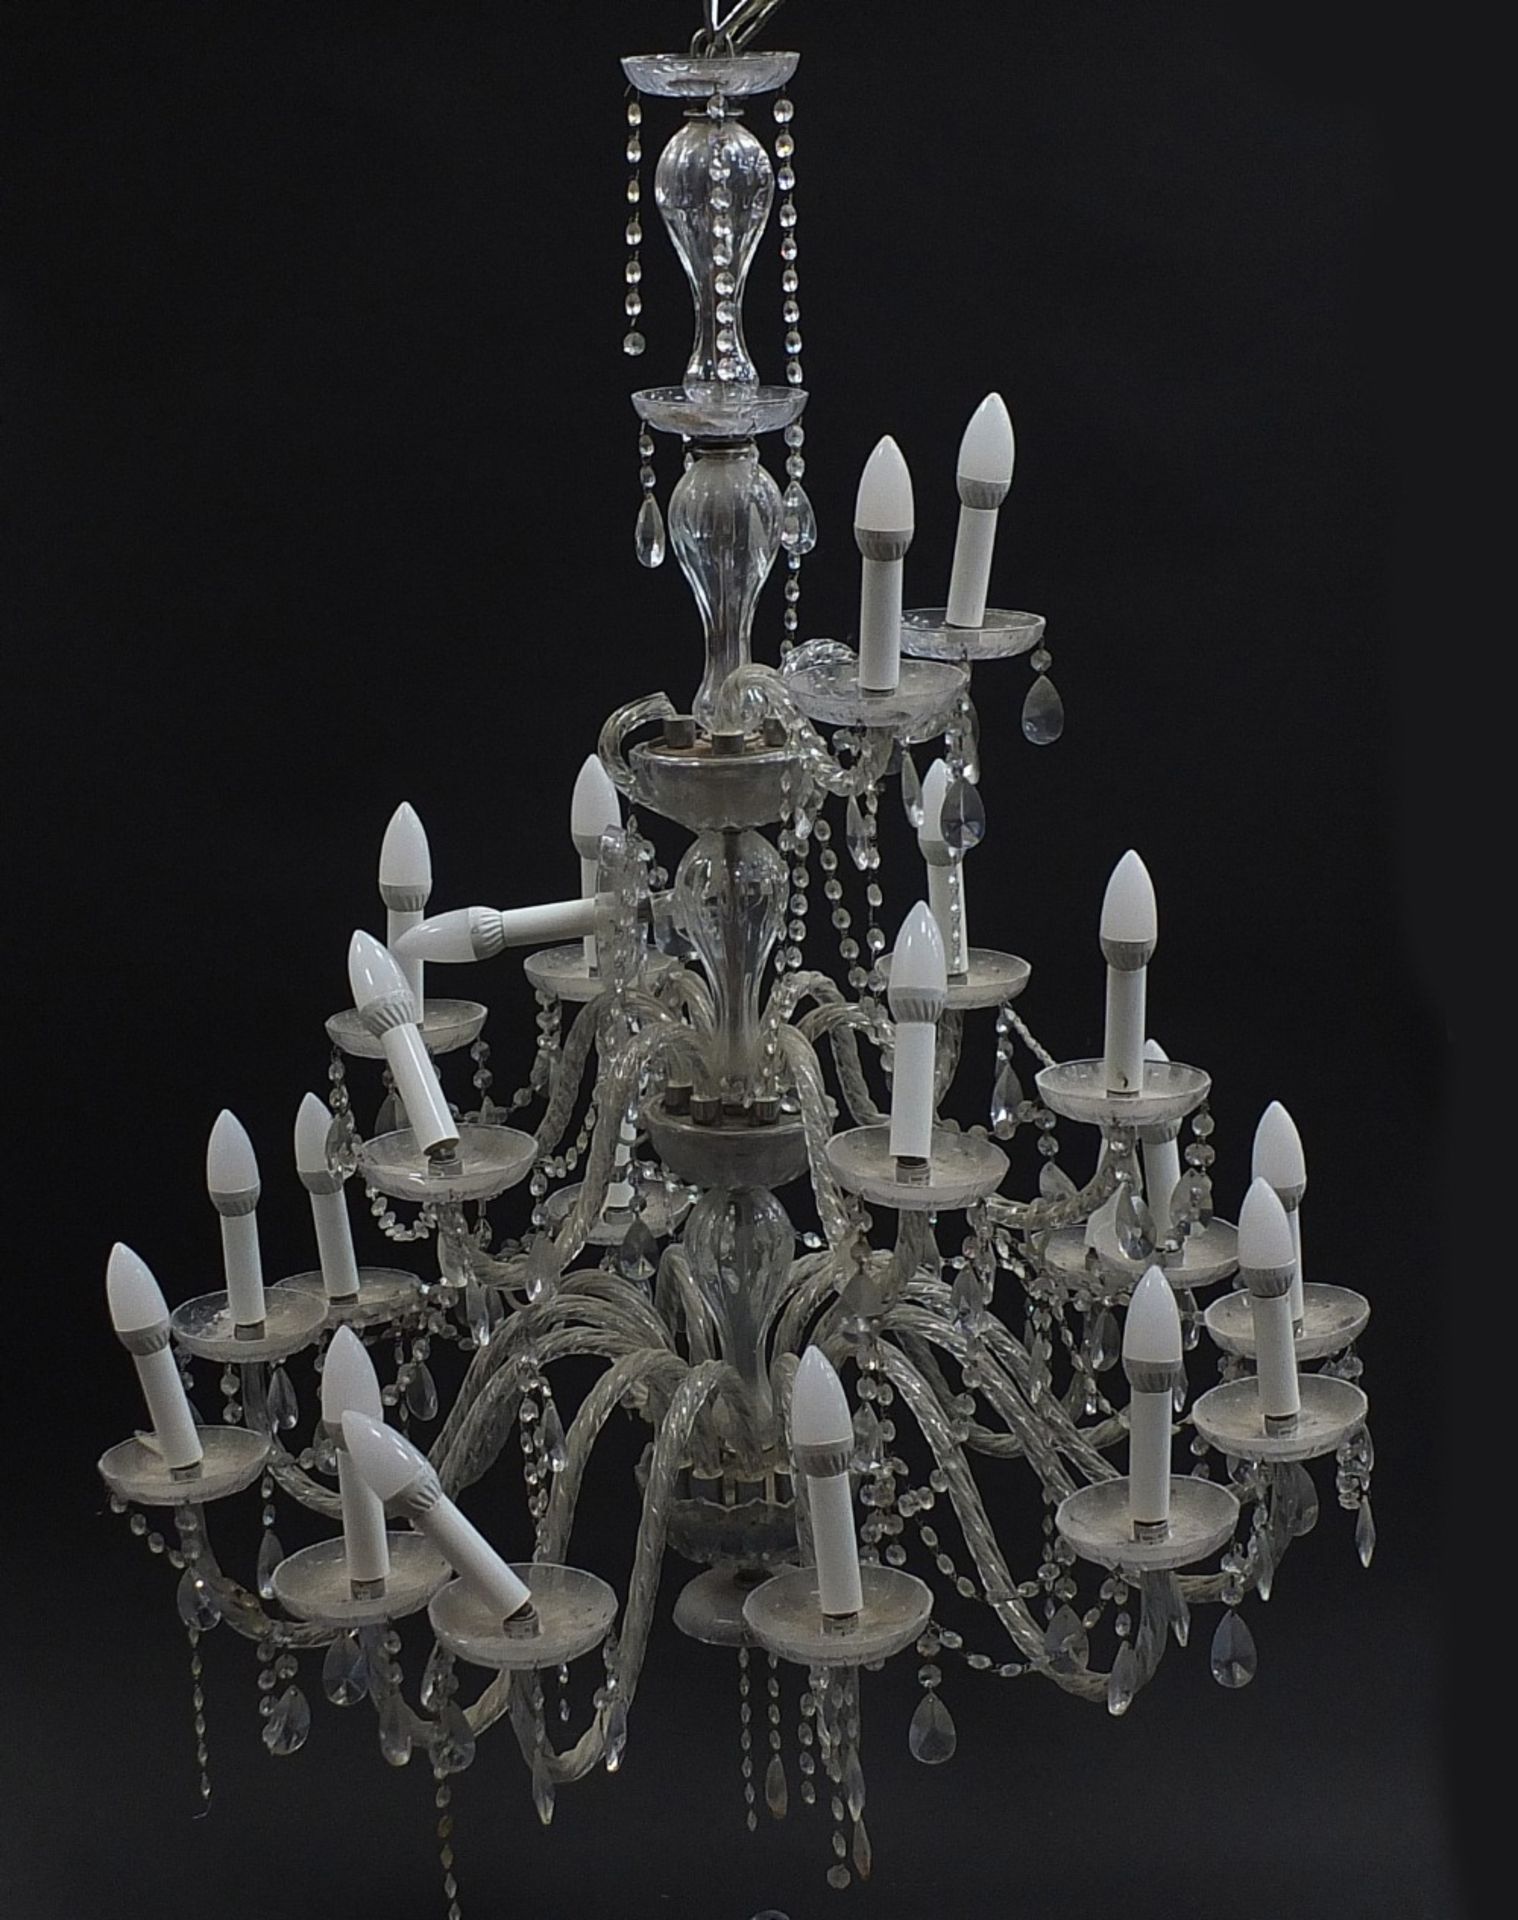 Large glass three tier chandelier with twenty one branches, approximately 110cm high x 90cm in